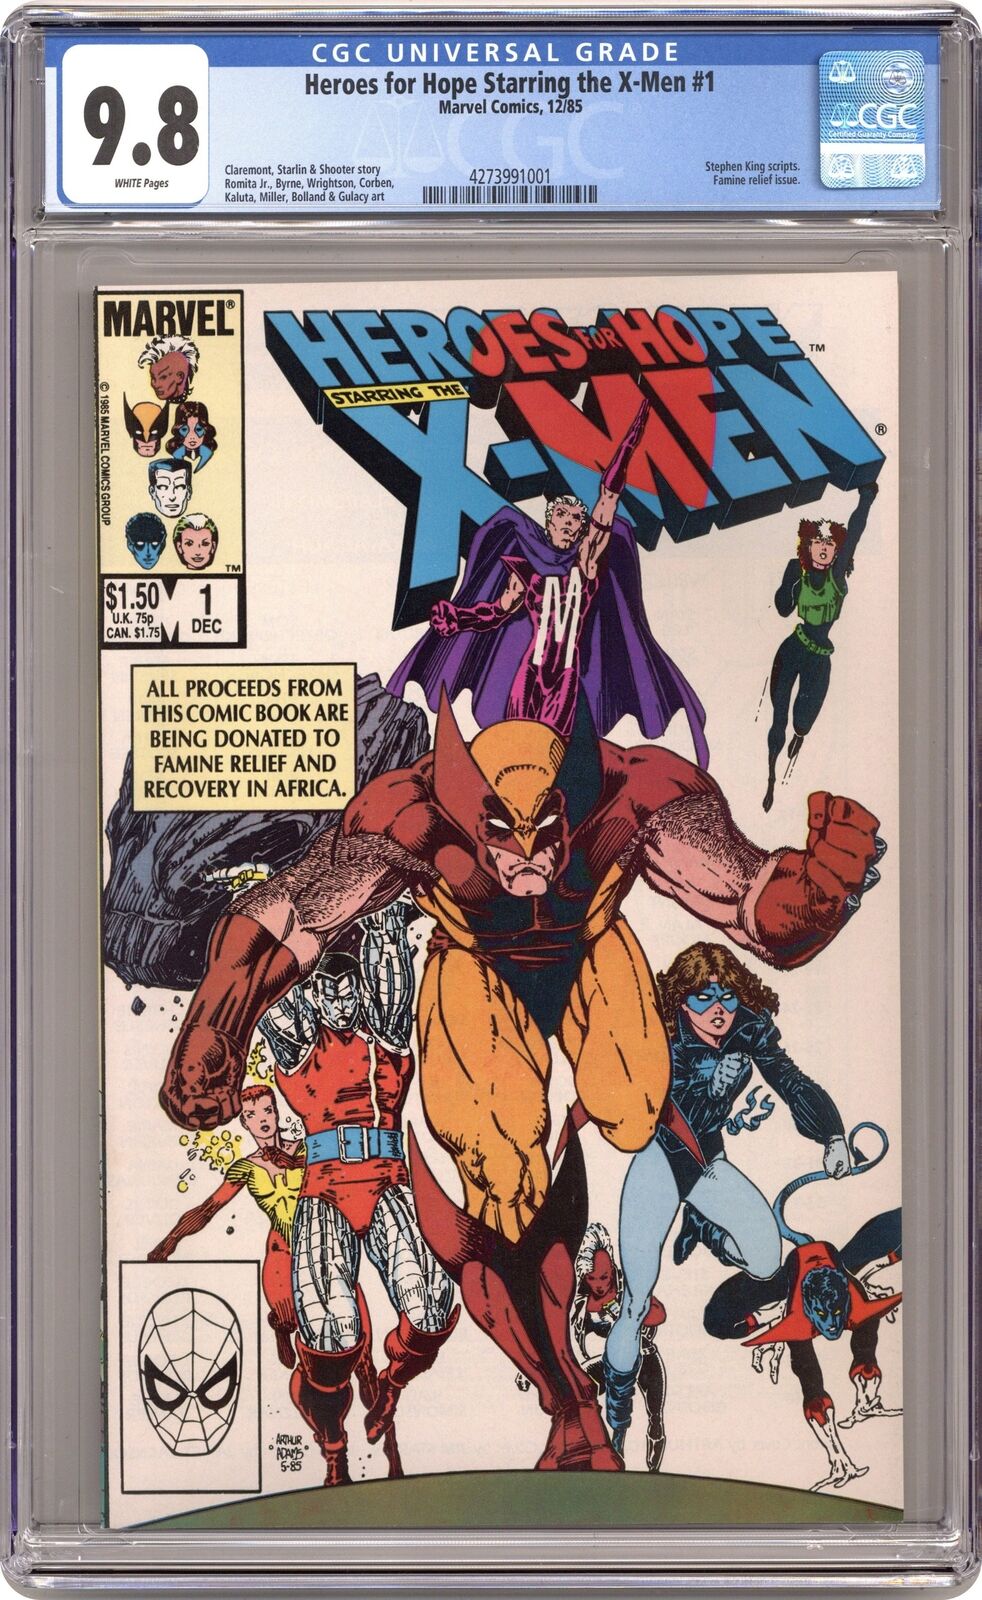 Heroes for Hope Starring the X-Men #1 CGC 9.8 1985 4273991001